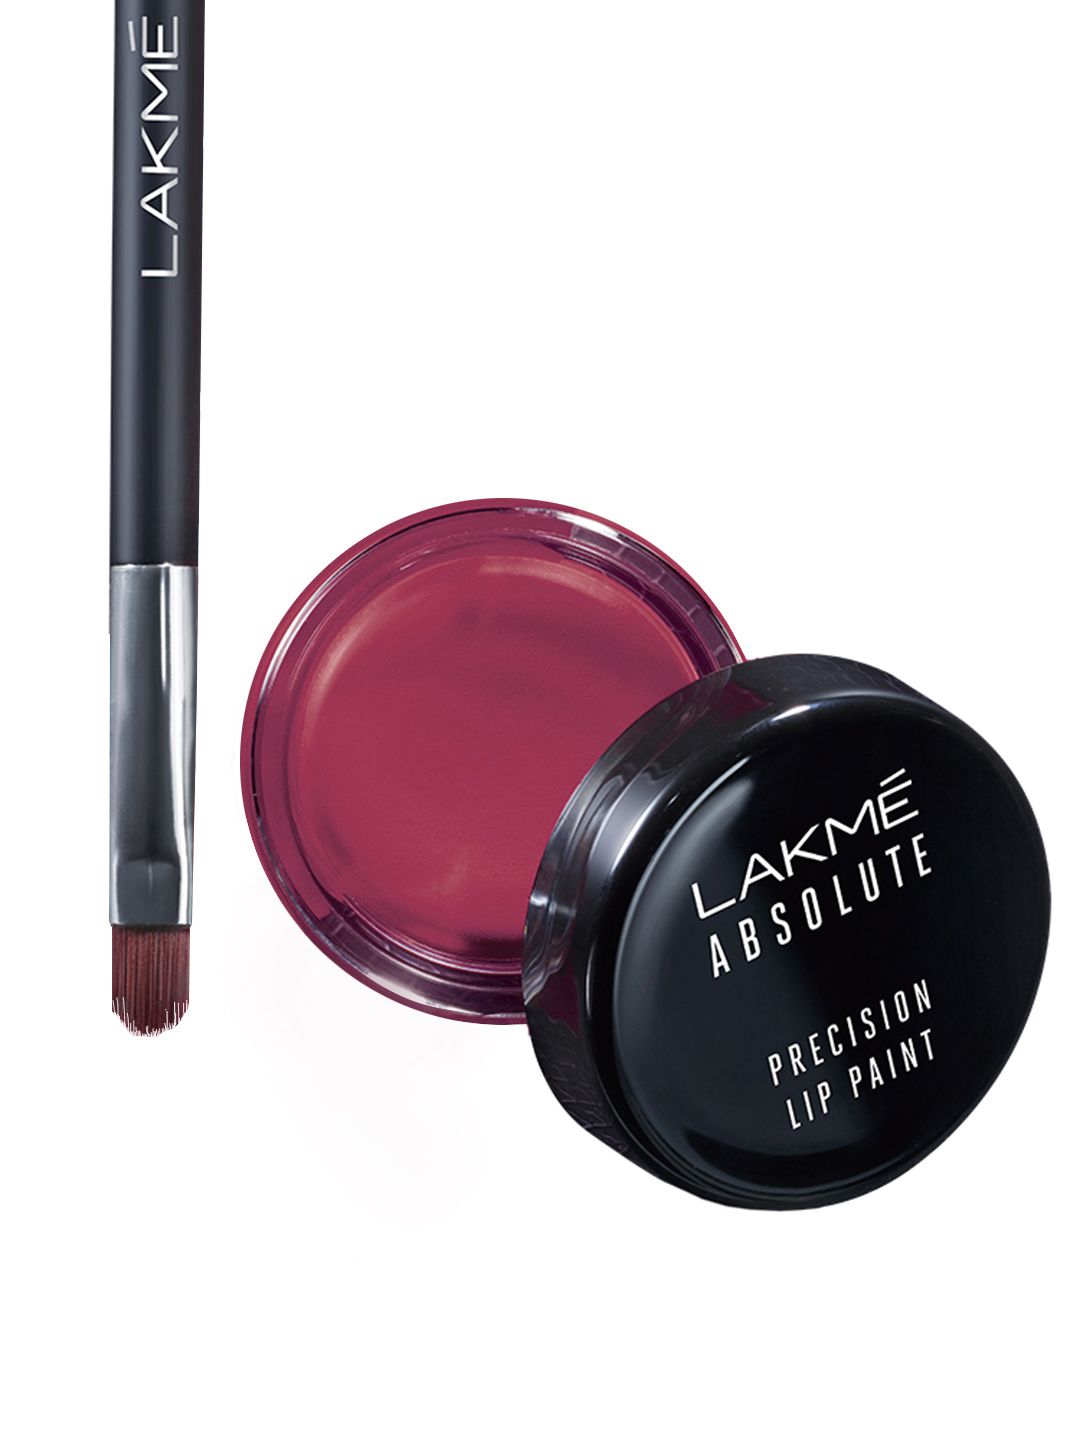 Lakme Absolute Precision Lip Paint - Dahlia Pink 202 Price in India